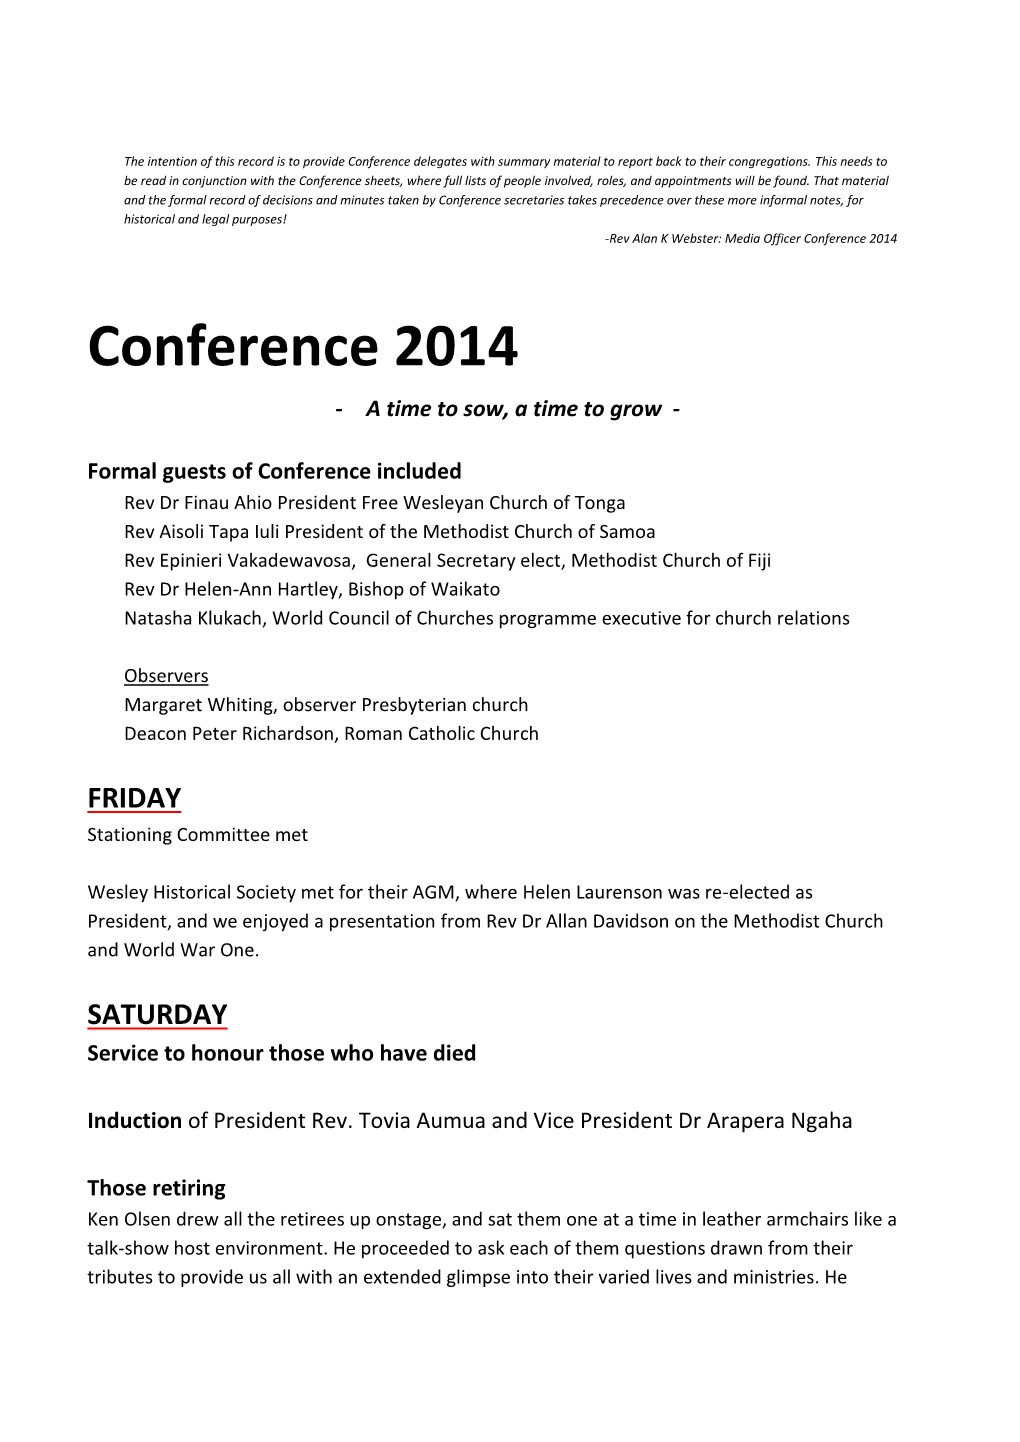 Conference 2014